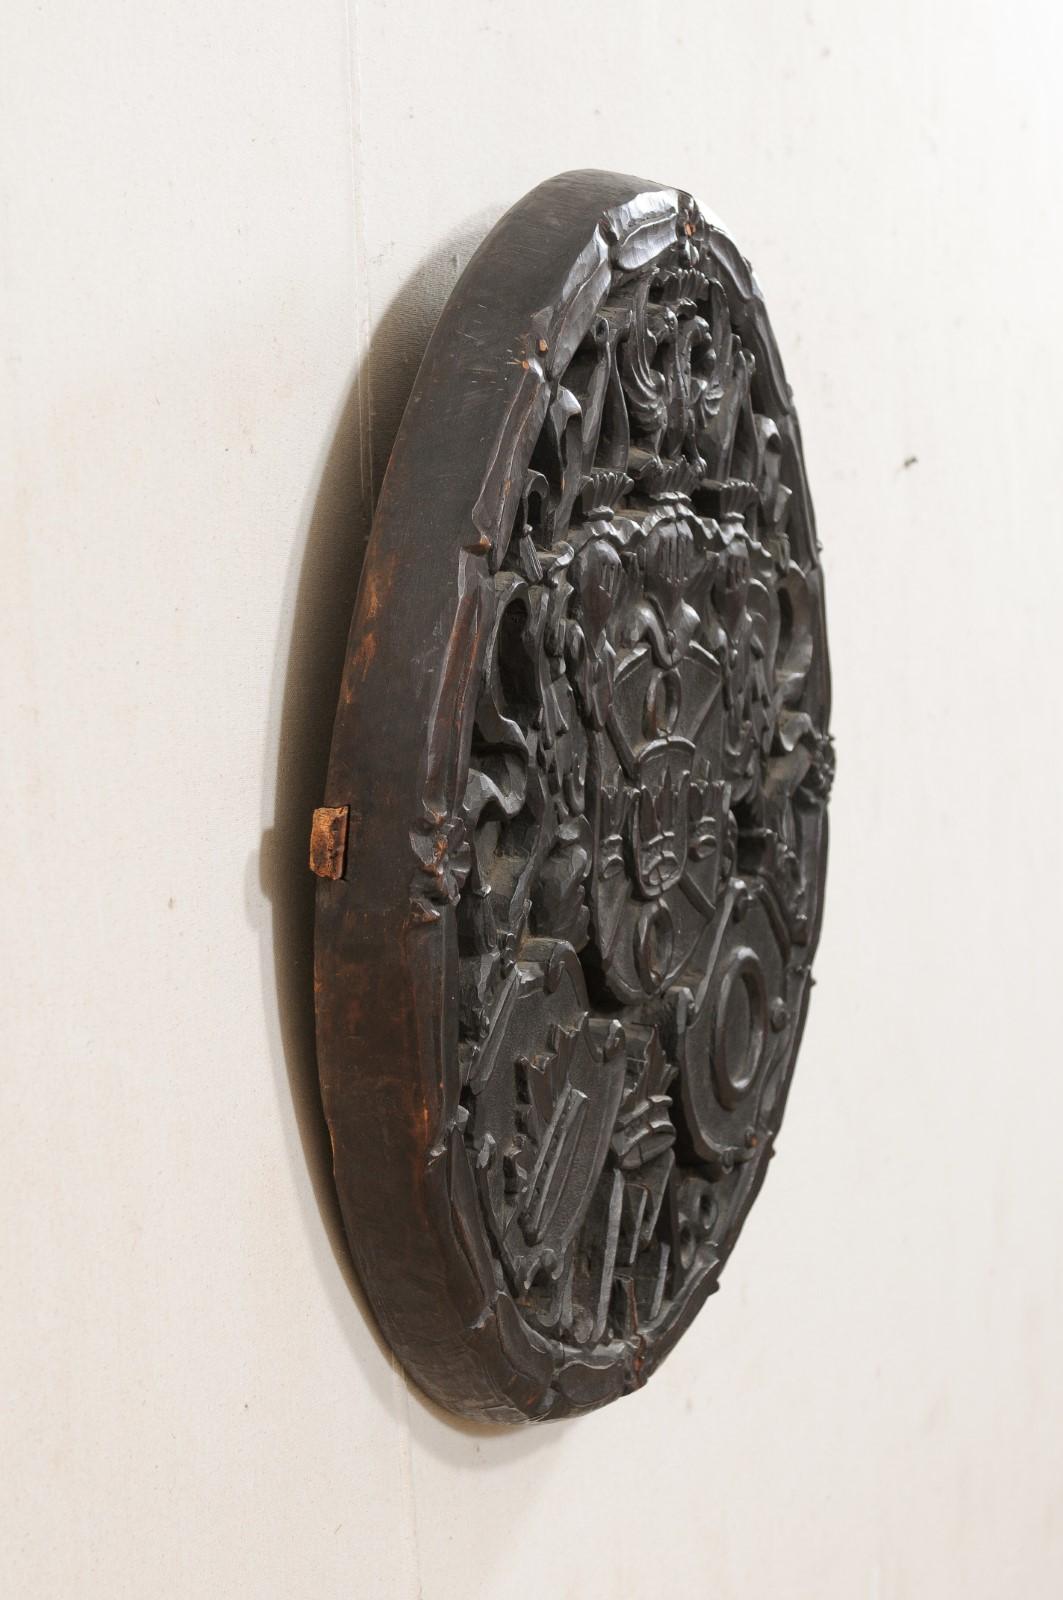 Antique English Round Wall Plaque Carved in Knights, Shield & Crown Motif  For Sale 1